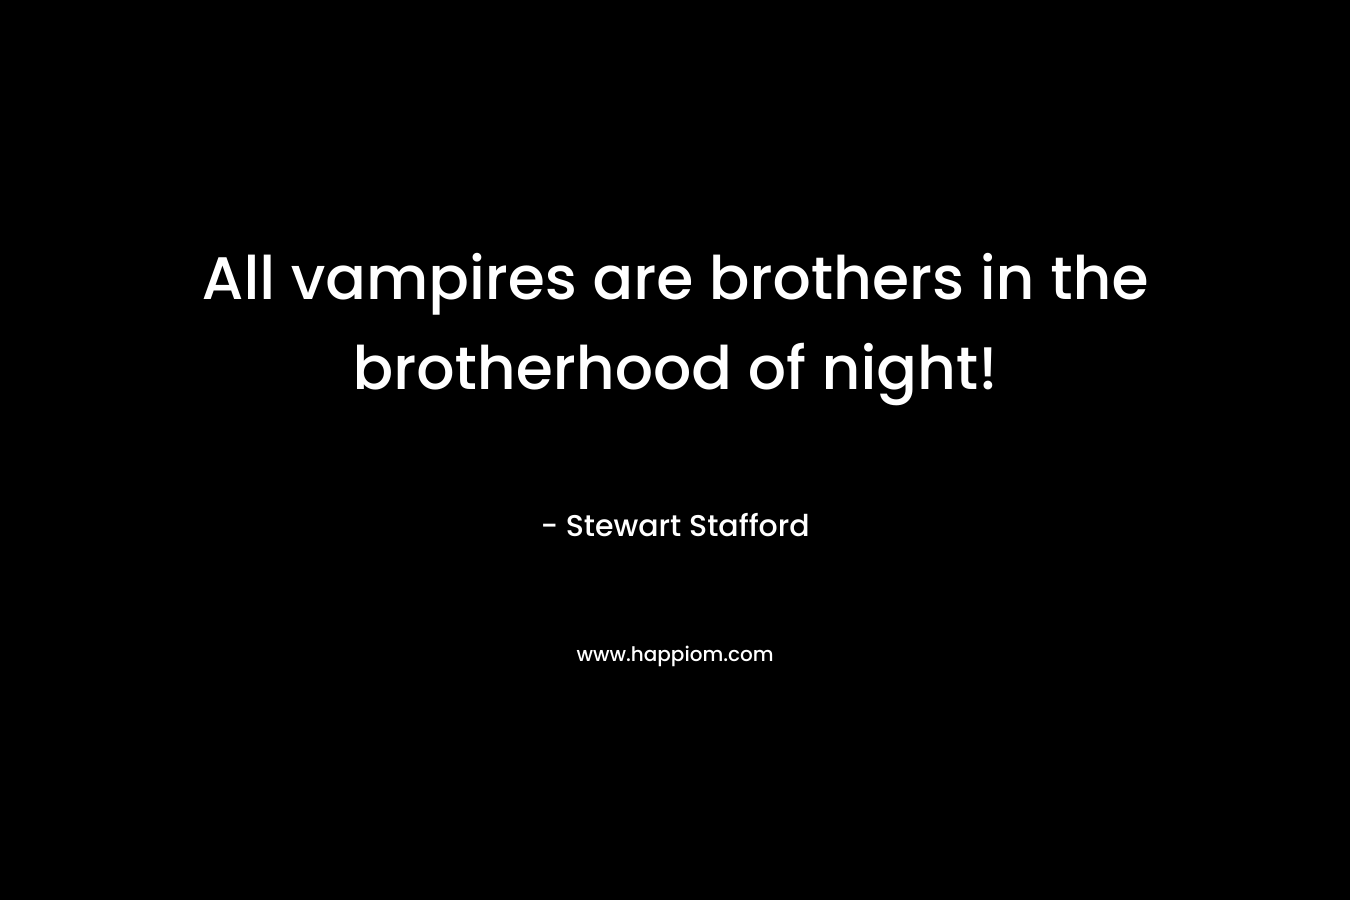 All vampires are brothers in the brotherhood of night! – Stewart Stafford